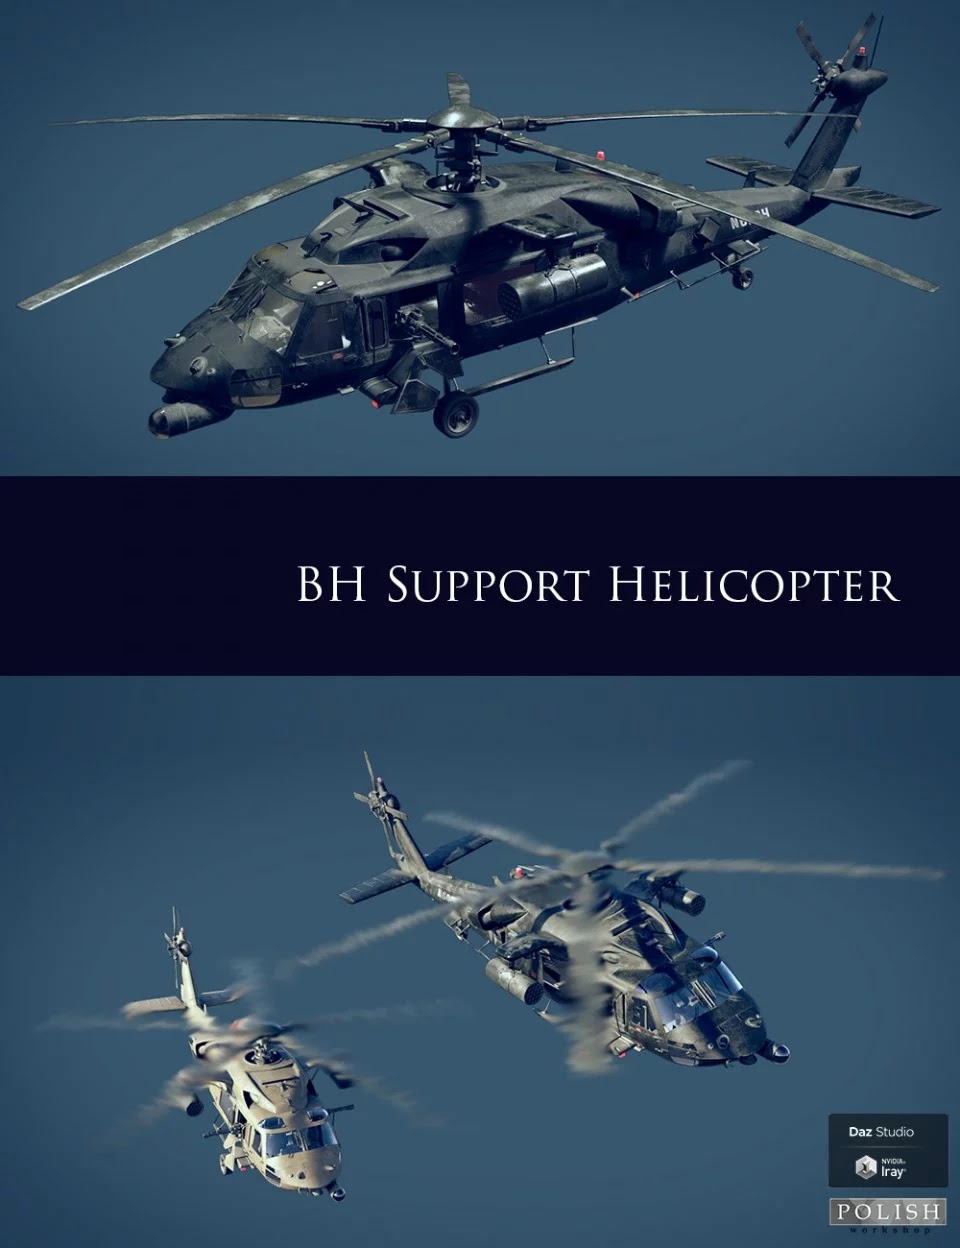 BH Support Helicopter_DAZ3DDL